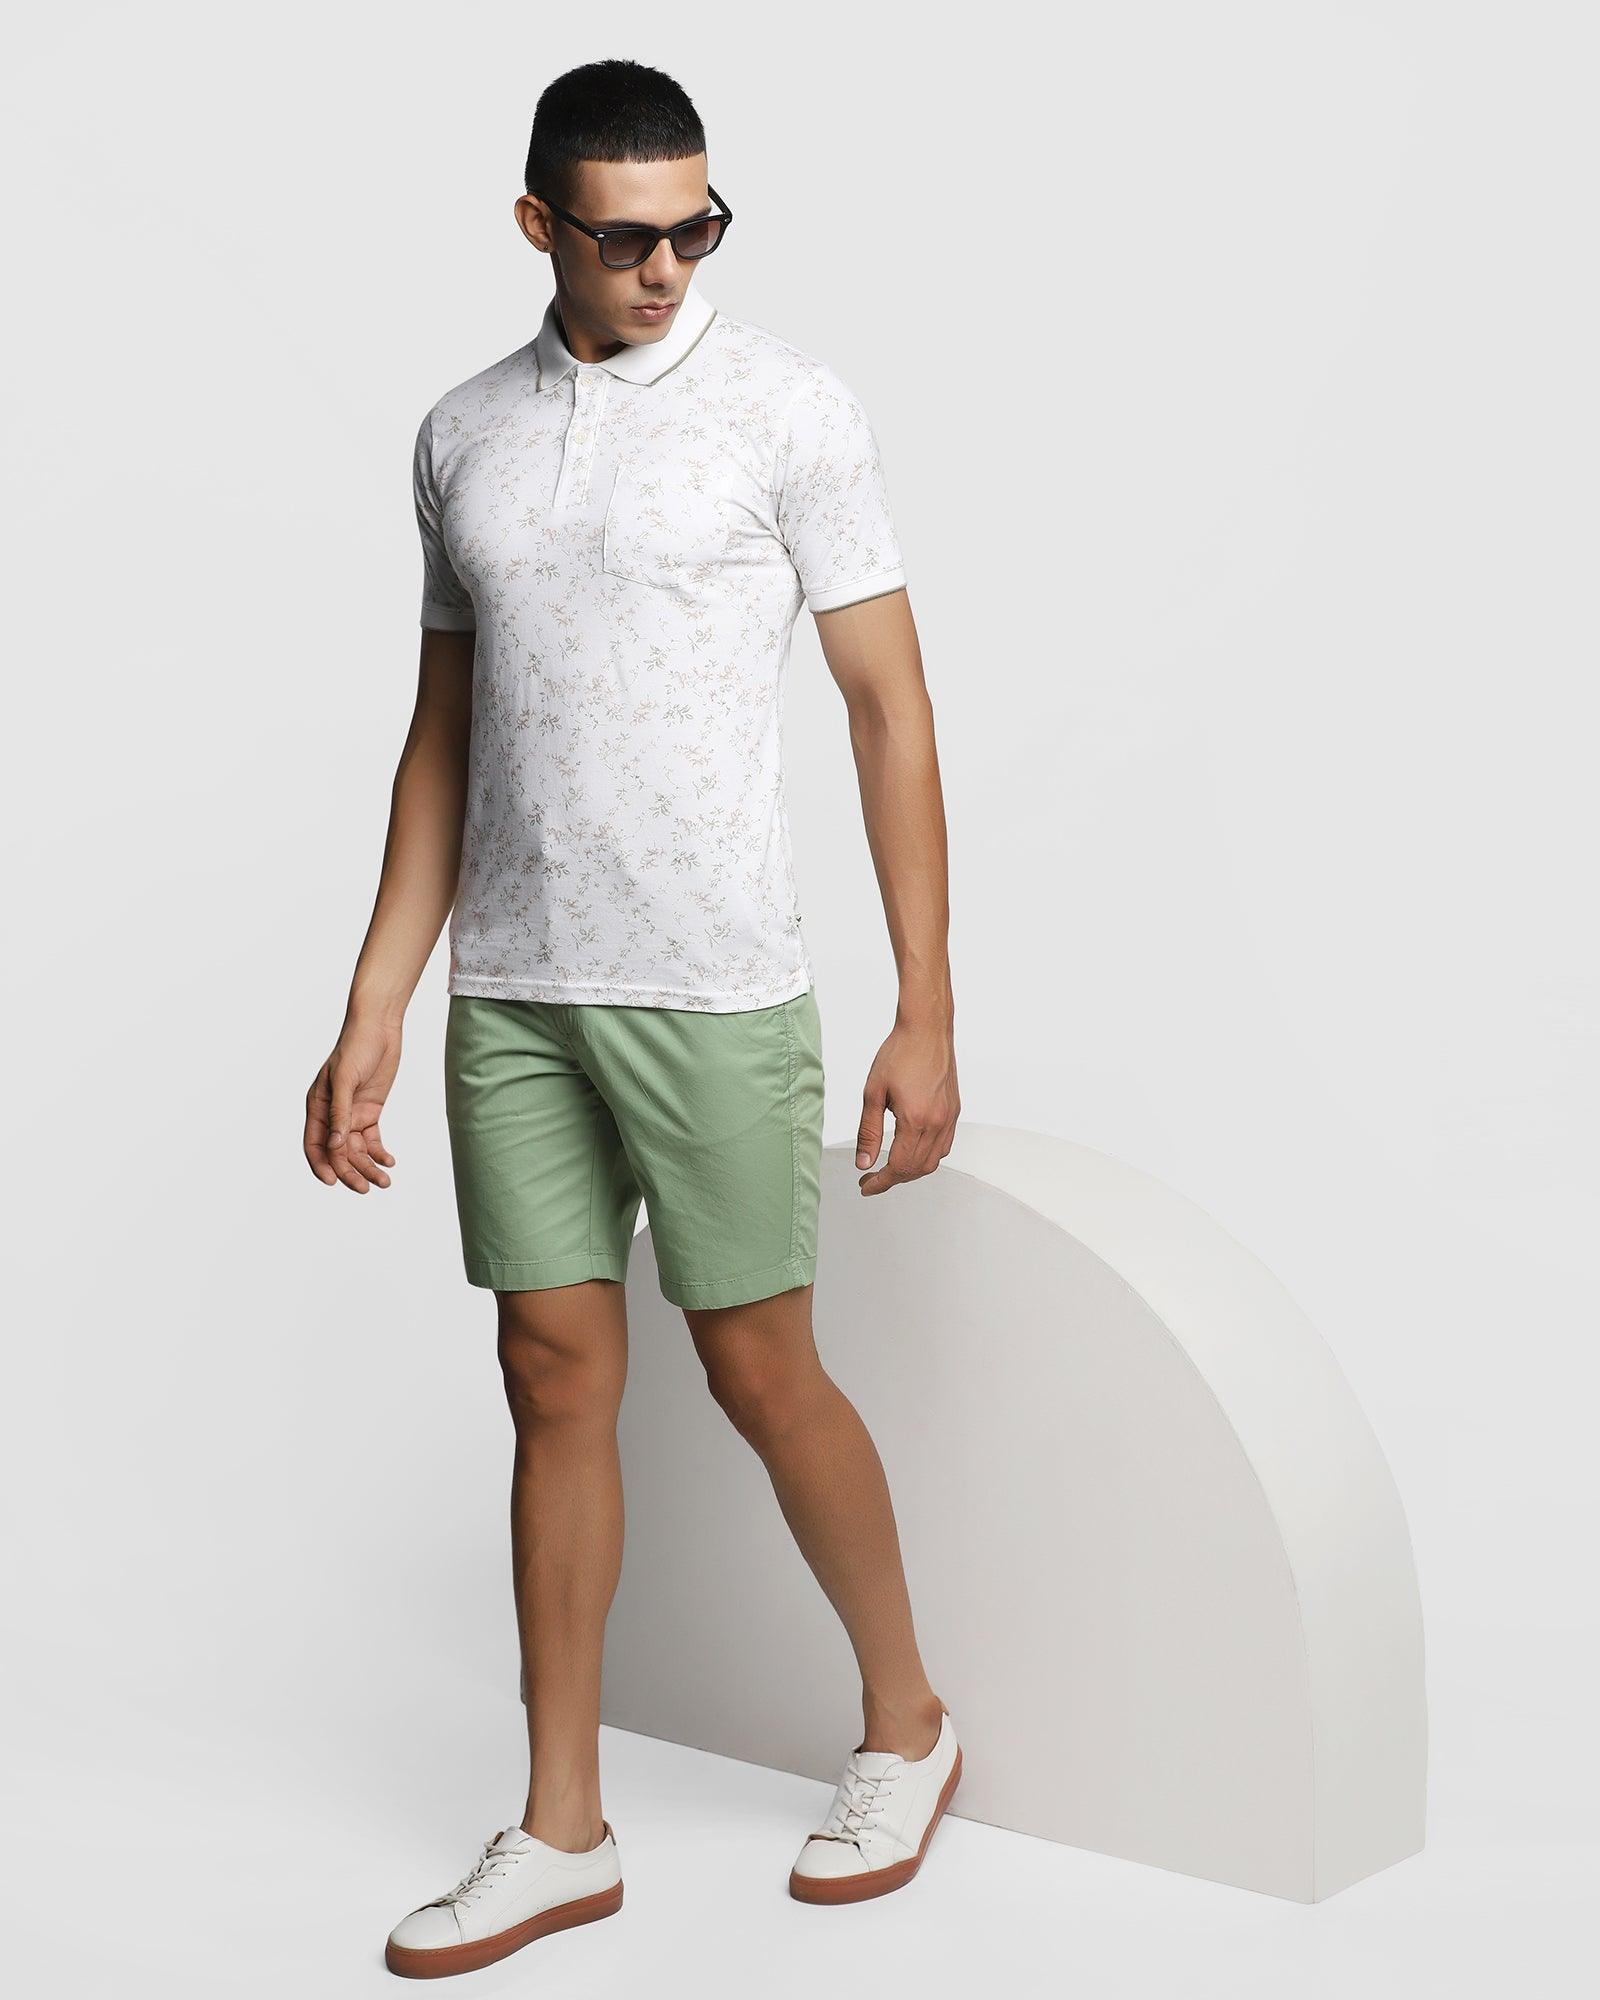 Polo Off White Printed T Shirt - Colin